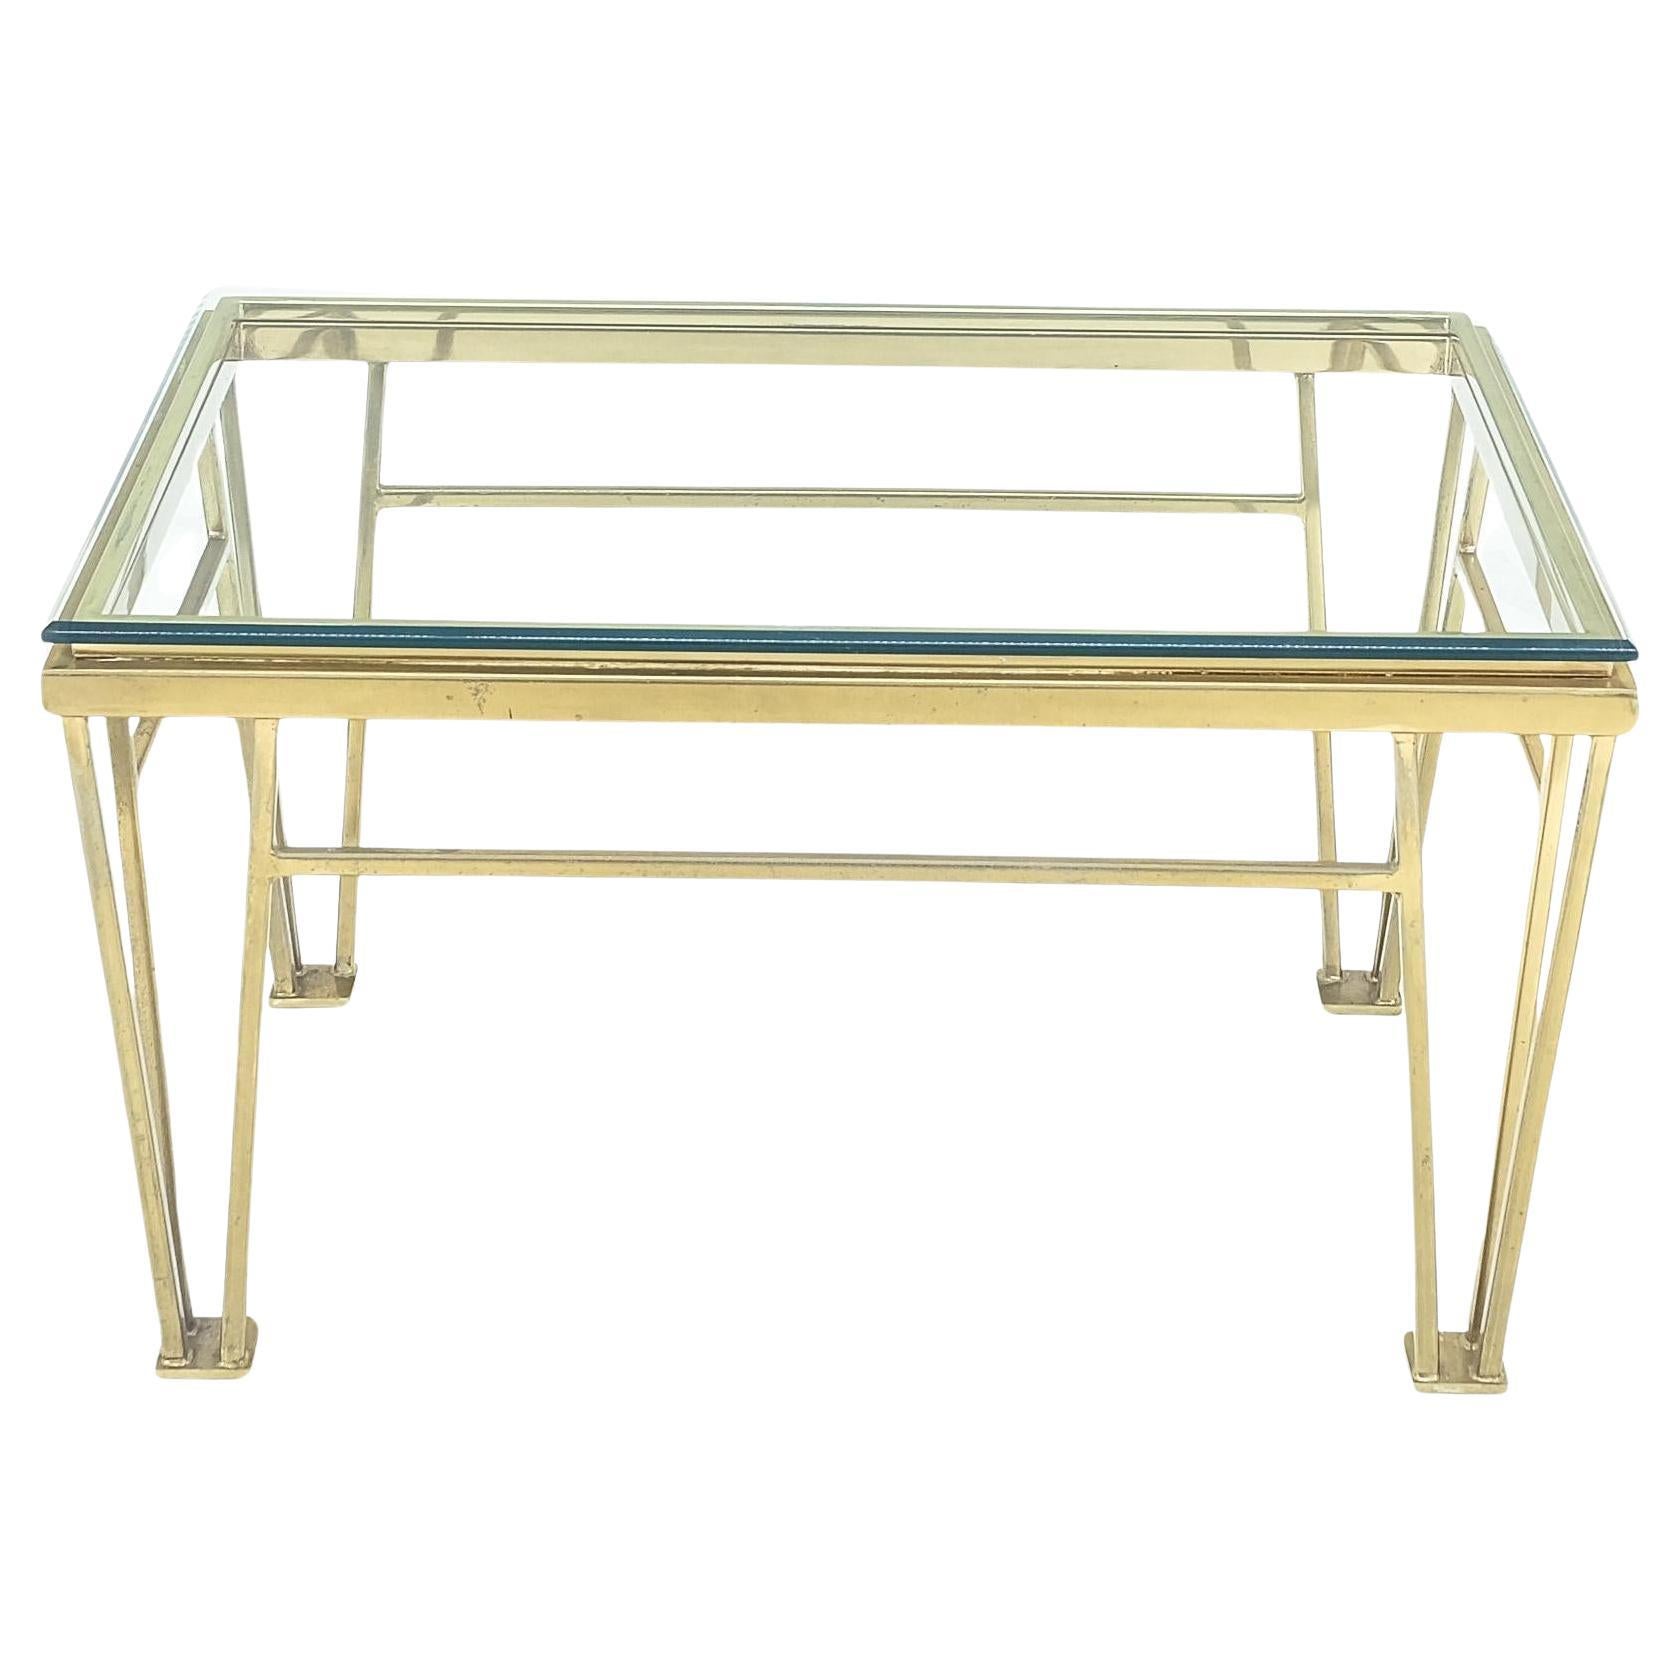 Geometric Frame Style Legs  Rectangular Brass Plated Side Table w/ Glass Top For Sale